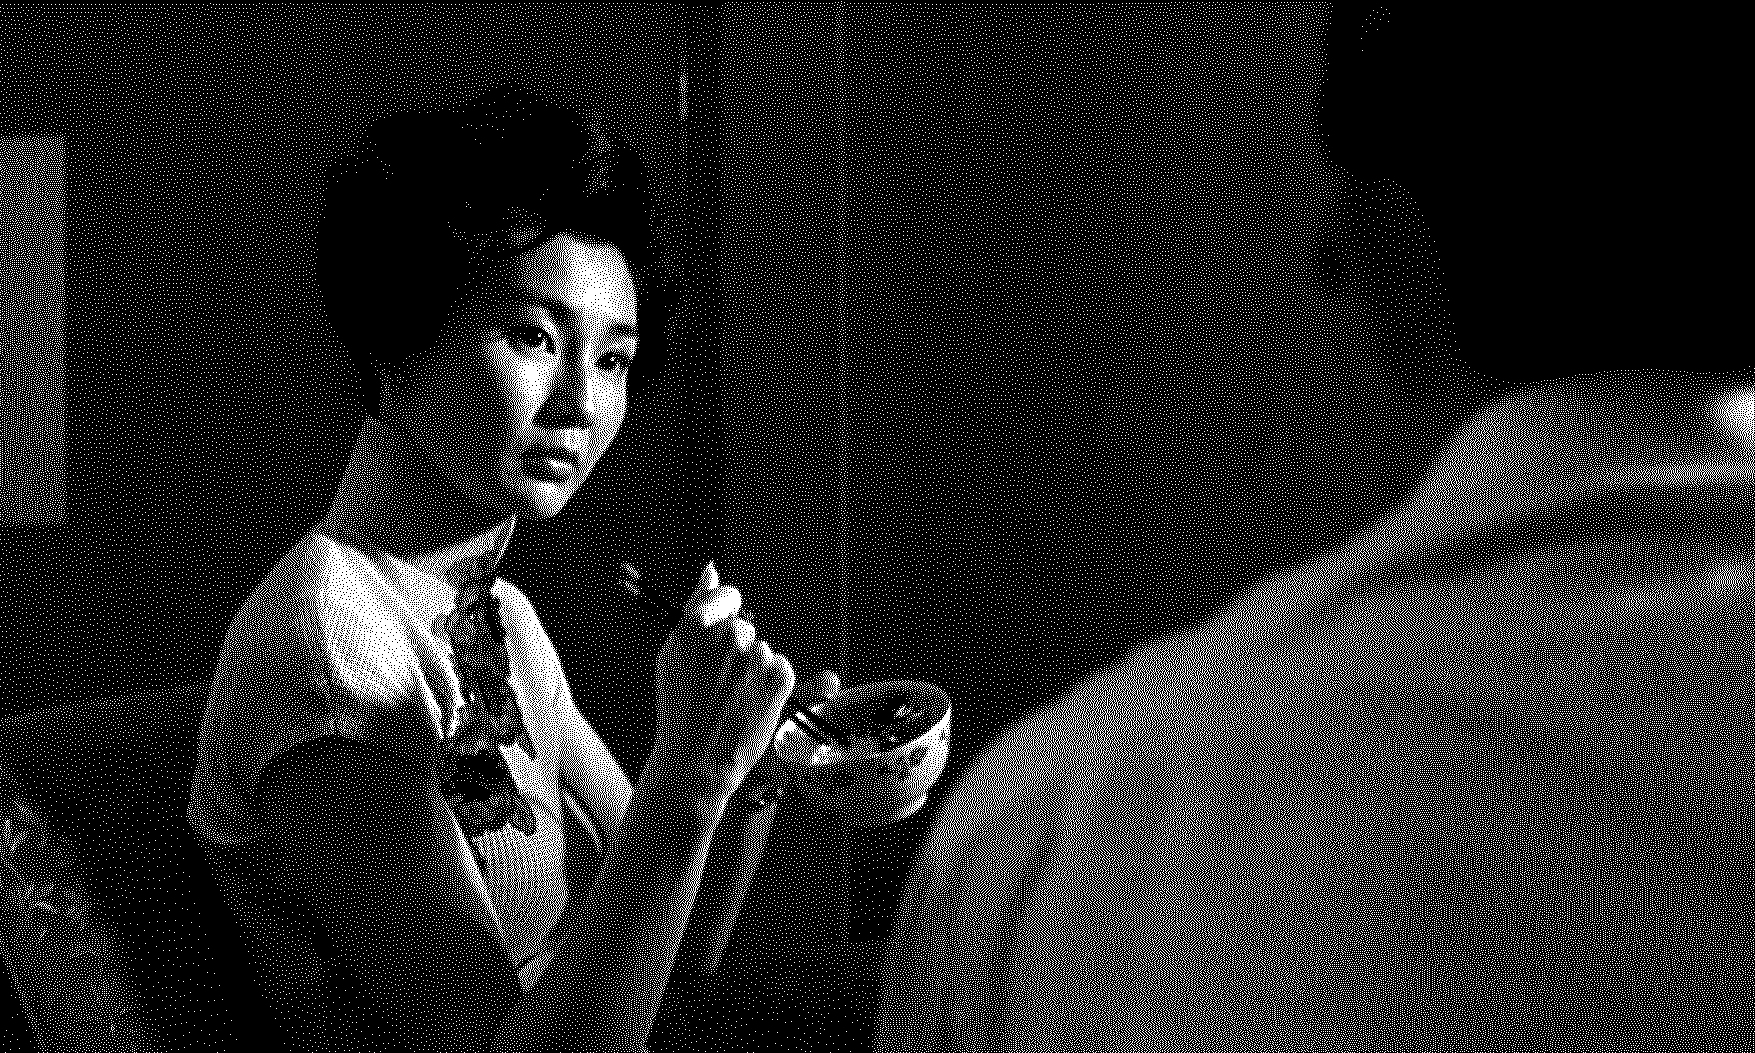 A black and white dithered still image from the movie 'In the Mood for Love'